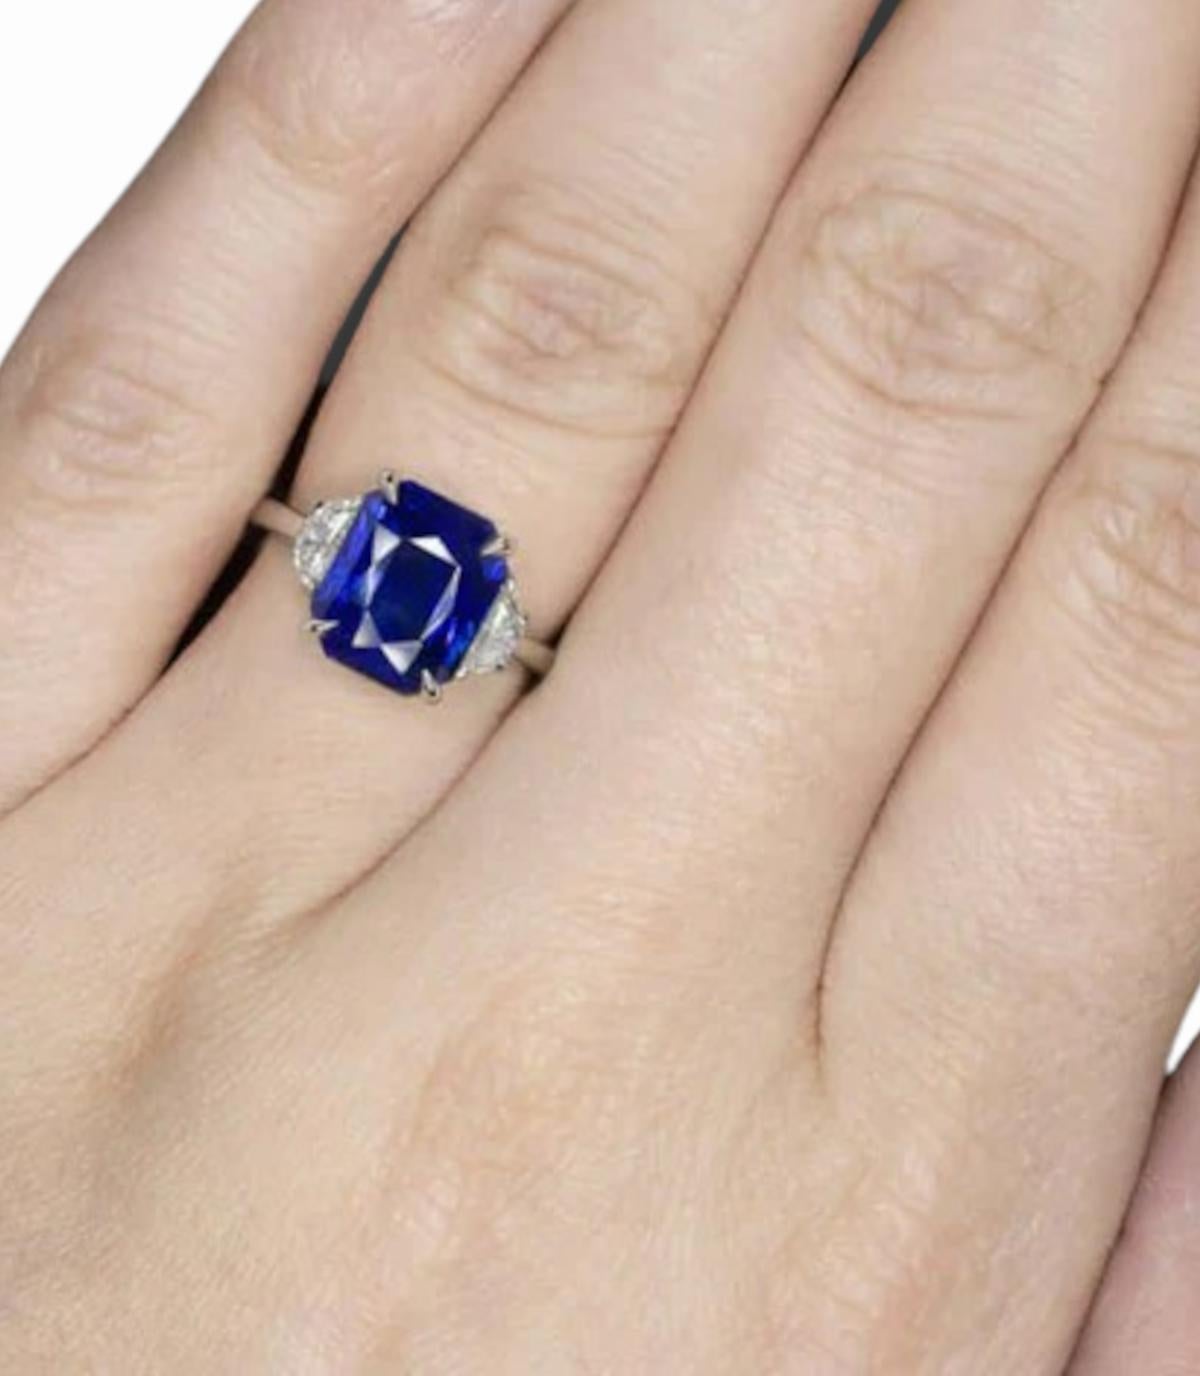 Discover the Enchantment of the Color-Changing Sapphire! 

Embark on a journey of wonder with this magnificent gemstone:

🔹 Weight: 5.21 carats
🔹 Measurements: 9.73 x 8.64 x 6.15 mm
🔹 Cutting: Expertly faceted to perfection
🔹 Shape: Rectangular